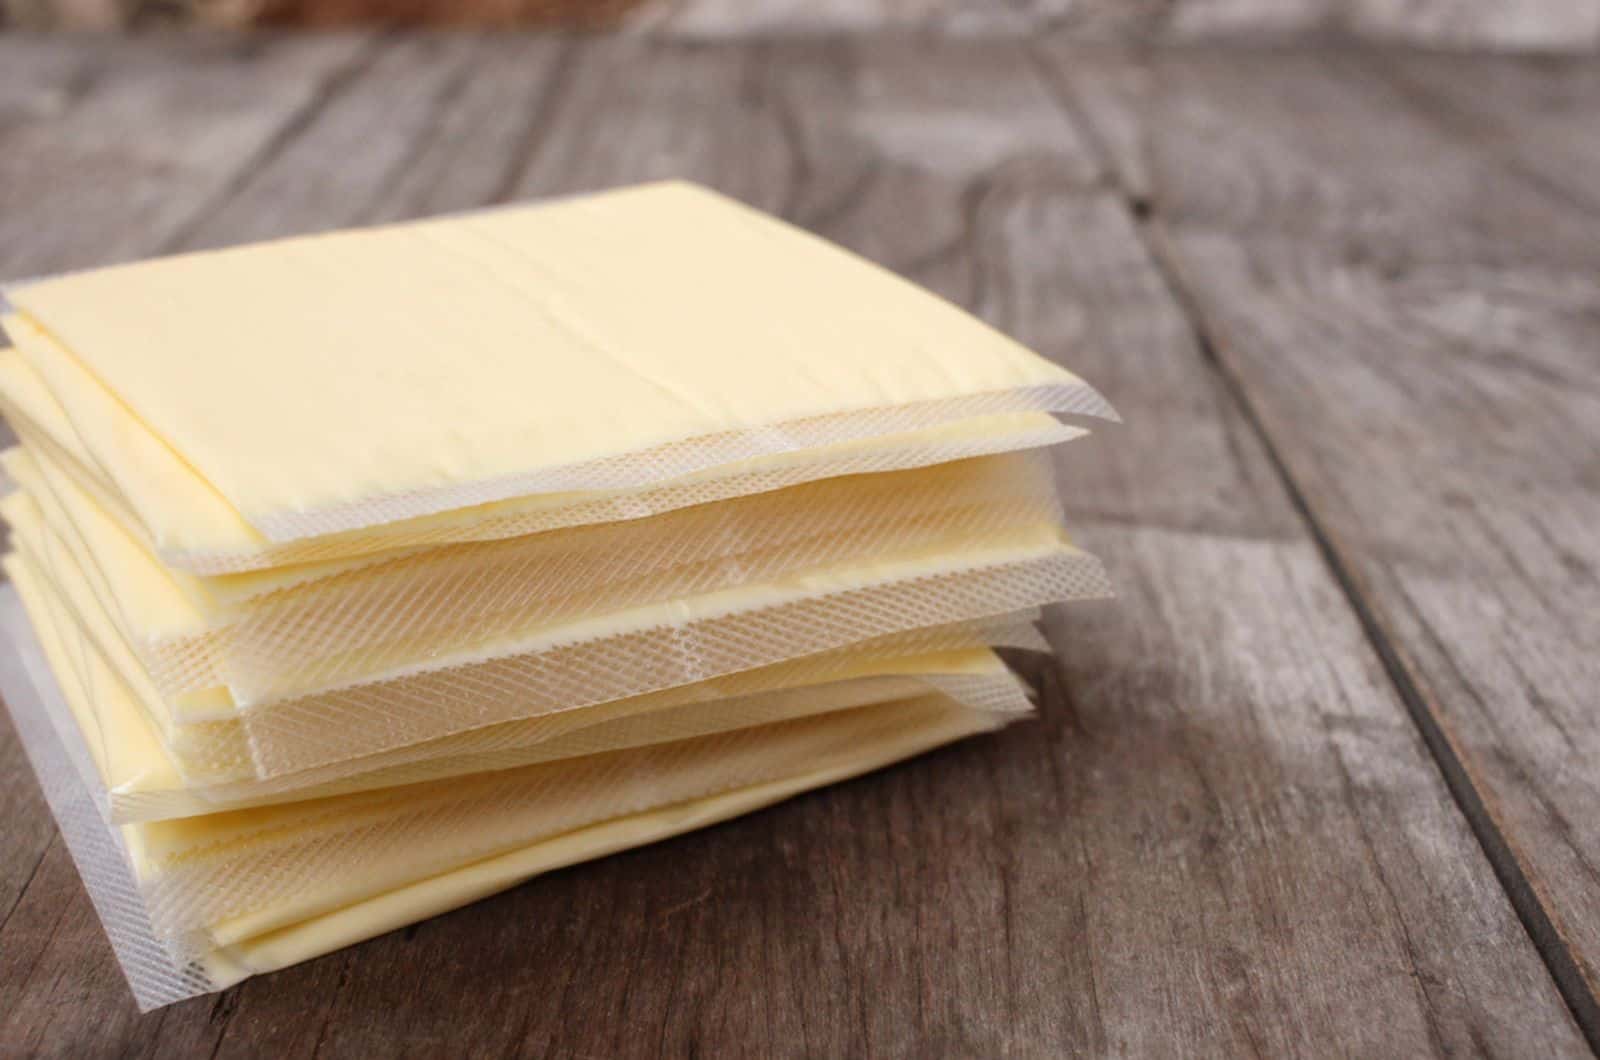 Slices of american cheese on the table